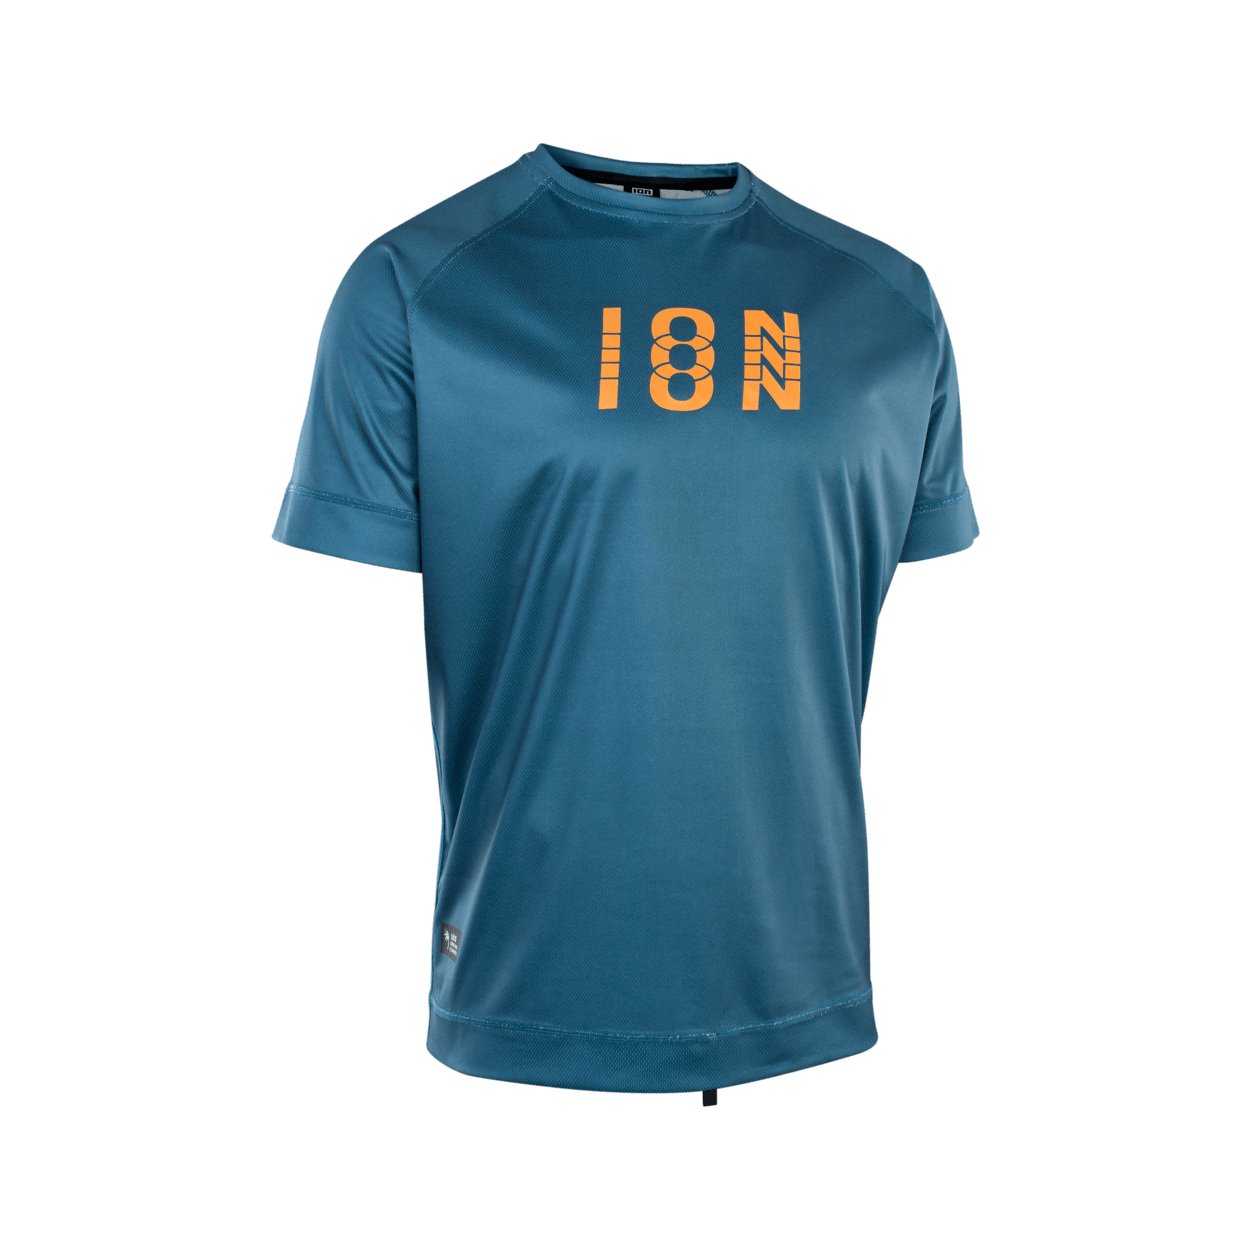 ION Wetshirt SS men 2022 - Worthing Watersports - 9010583051048 - Tops - ION Water